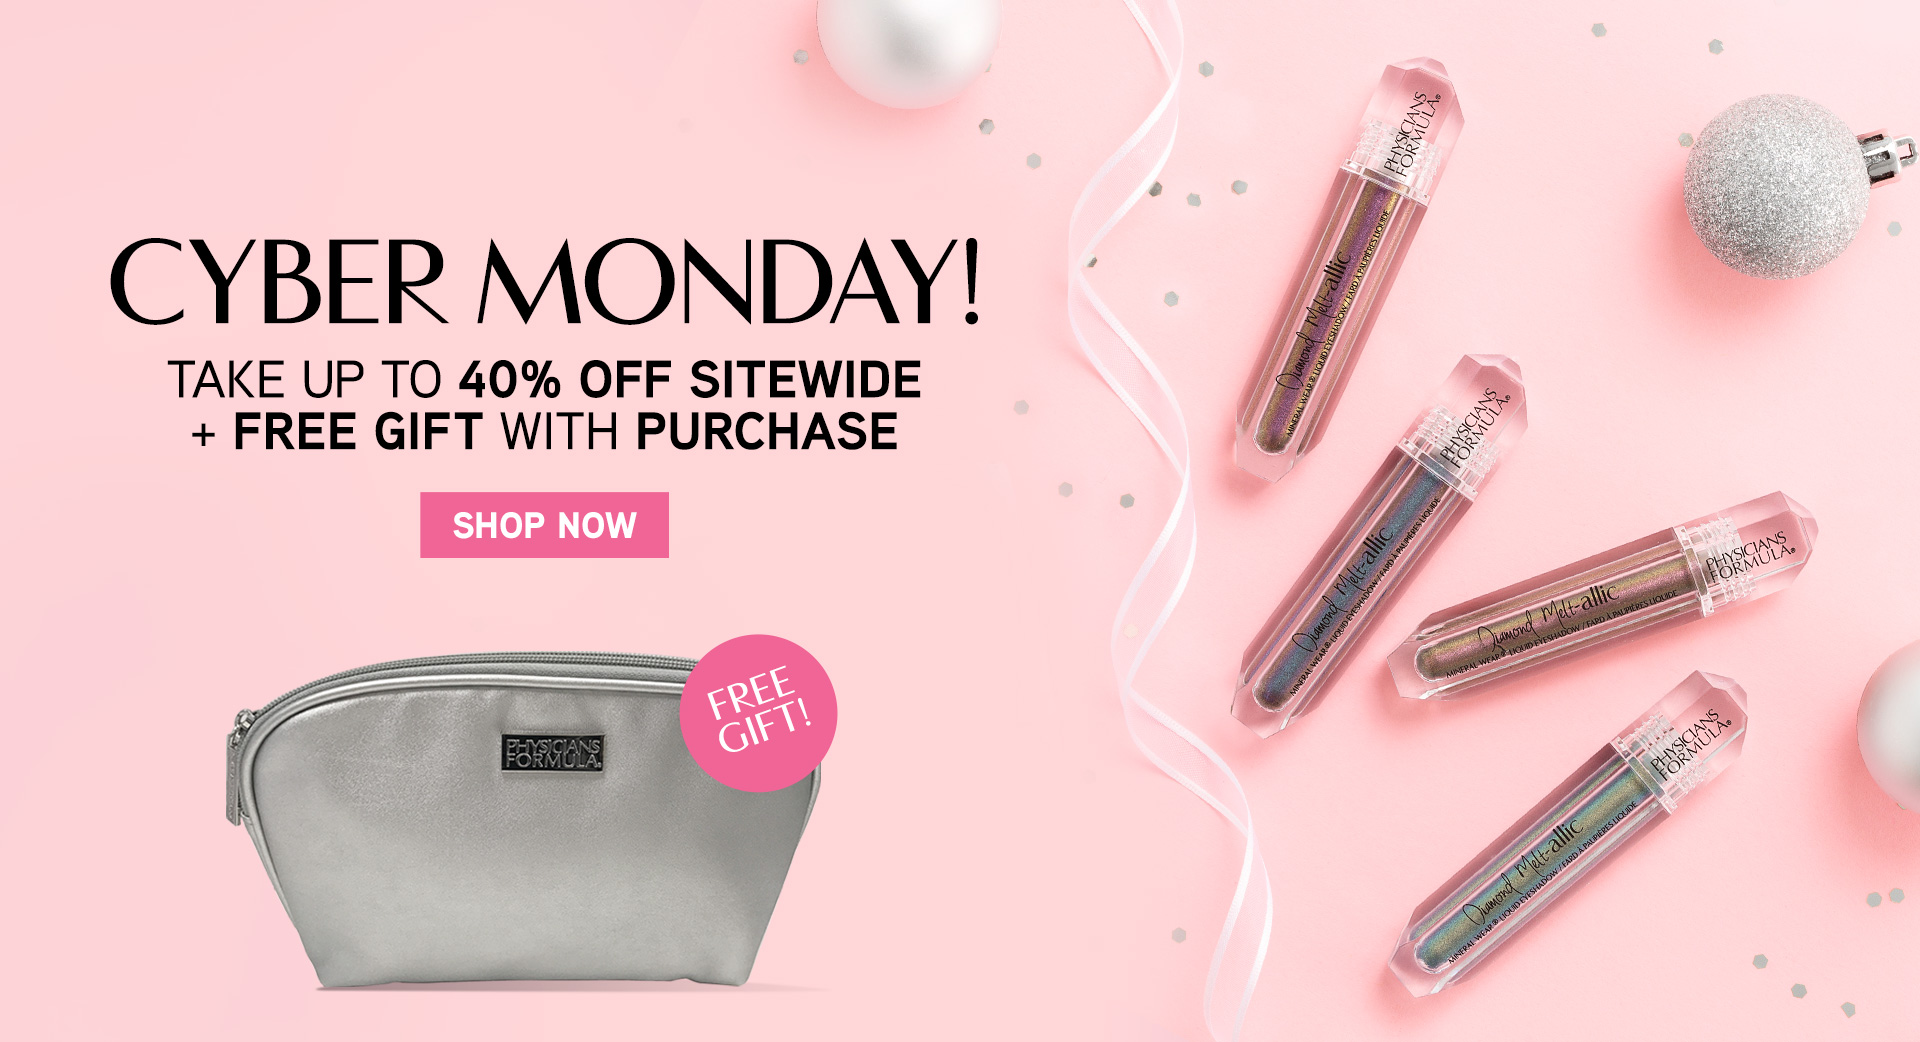 Cyber Monday! Take Up to 40% Off Sitewide + Free Gift with Purchase - Use Code - PFCYBER